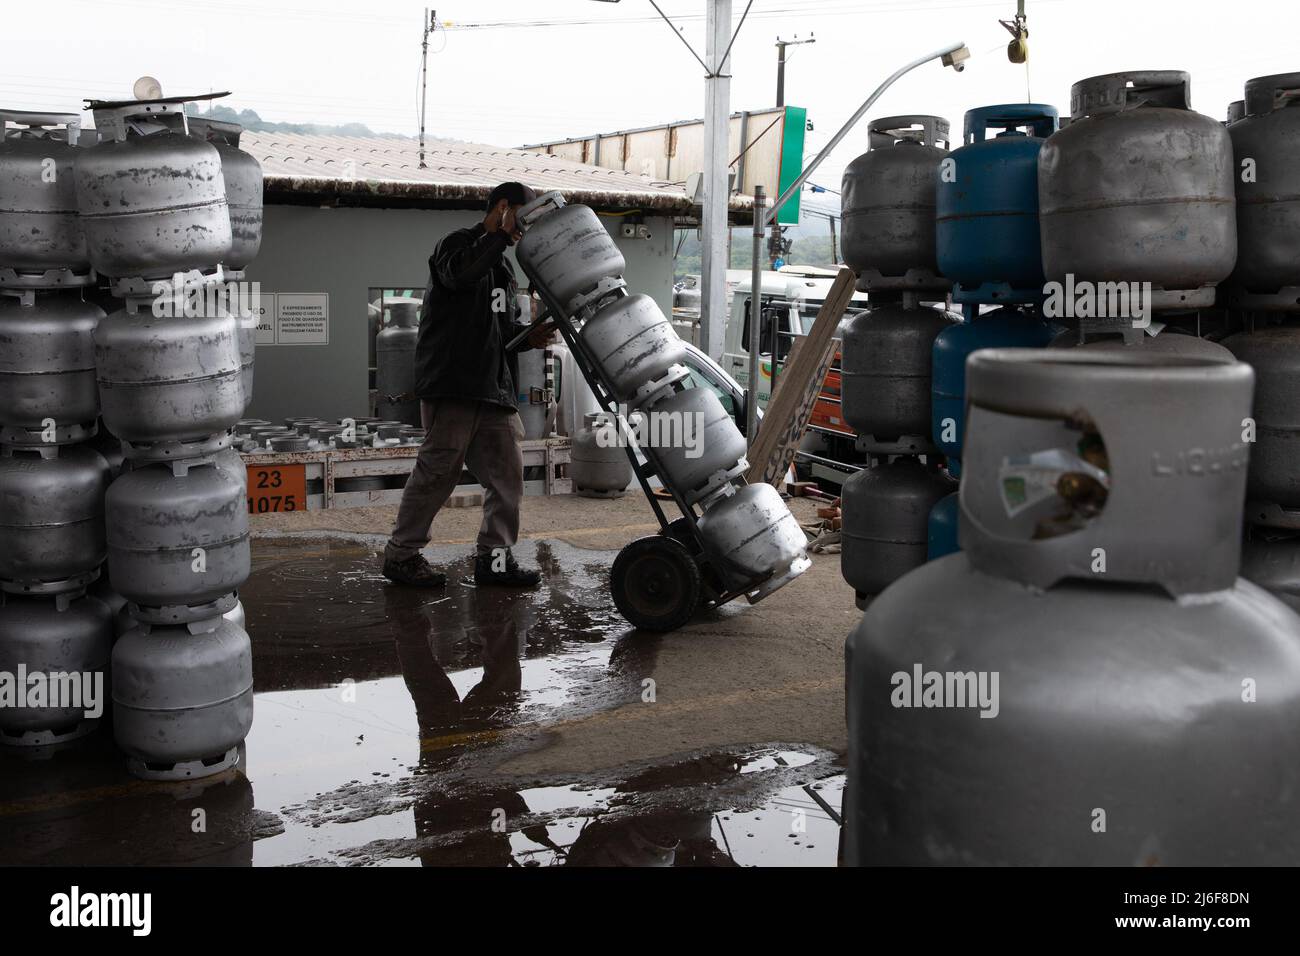 (220501) -- CAXIAS DO SUL, May 1, 2022 (Xinhua) -- A worker is seen at a gas distribution center in Caxias do Sul, Brazil's state of Rio Grande do Sul, on May 1, 2022.  Petrobras announced on April 29 that the price of natural gas sold to dealers will increase by 19 percent from May 1 in view of changes in Brent crude oil prices and exchange rates. (Xinhua/Wang Tiancong) Stock Photo